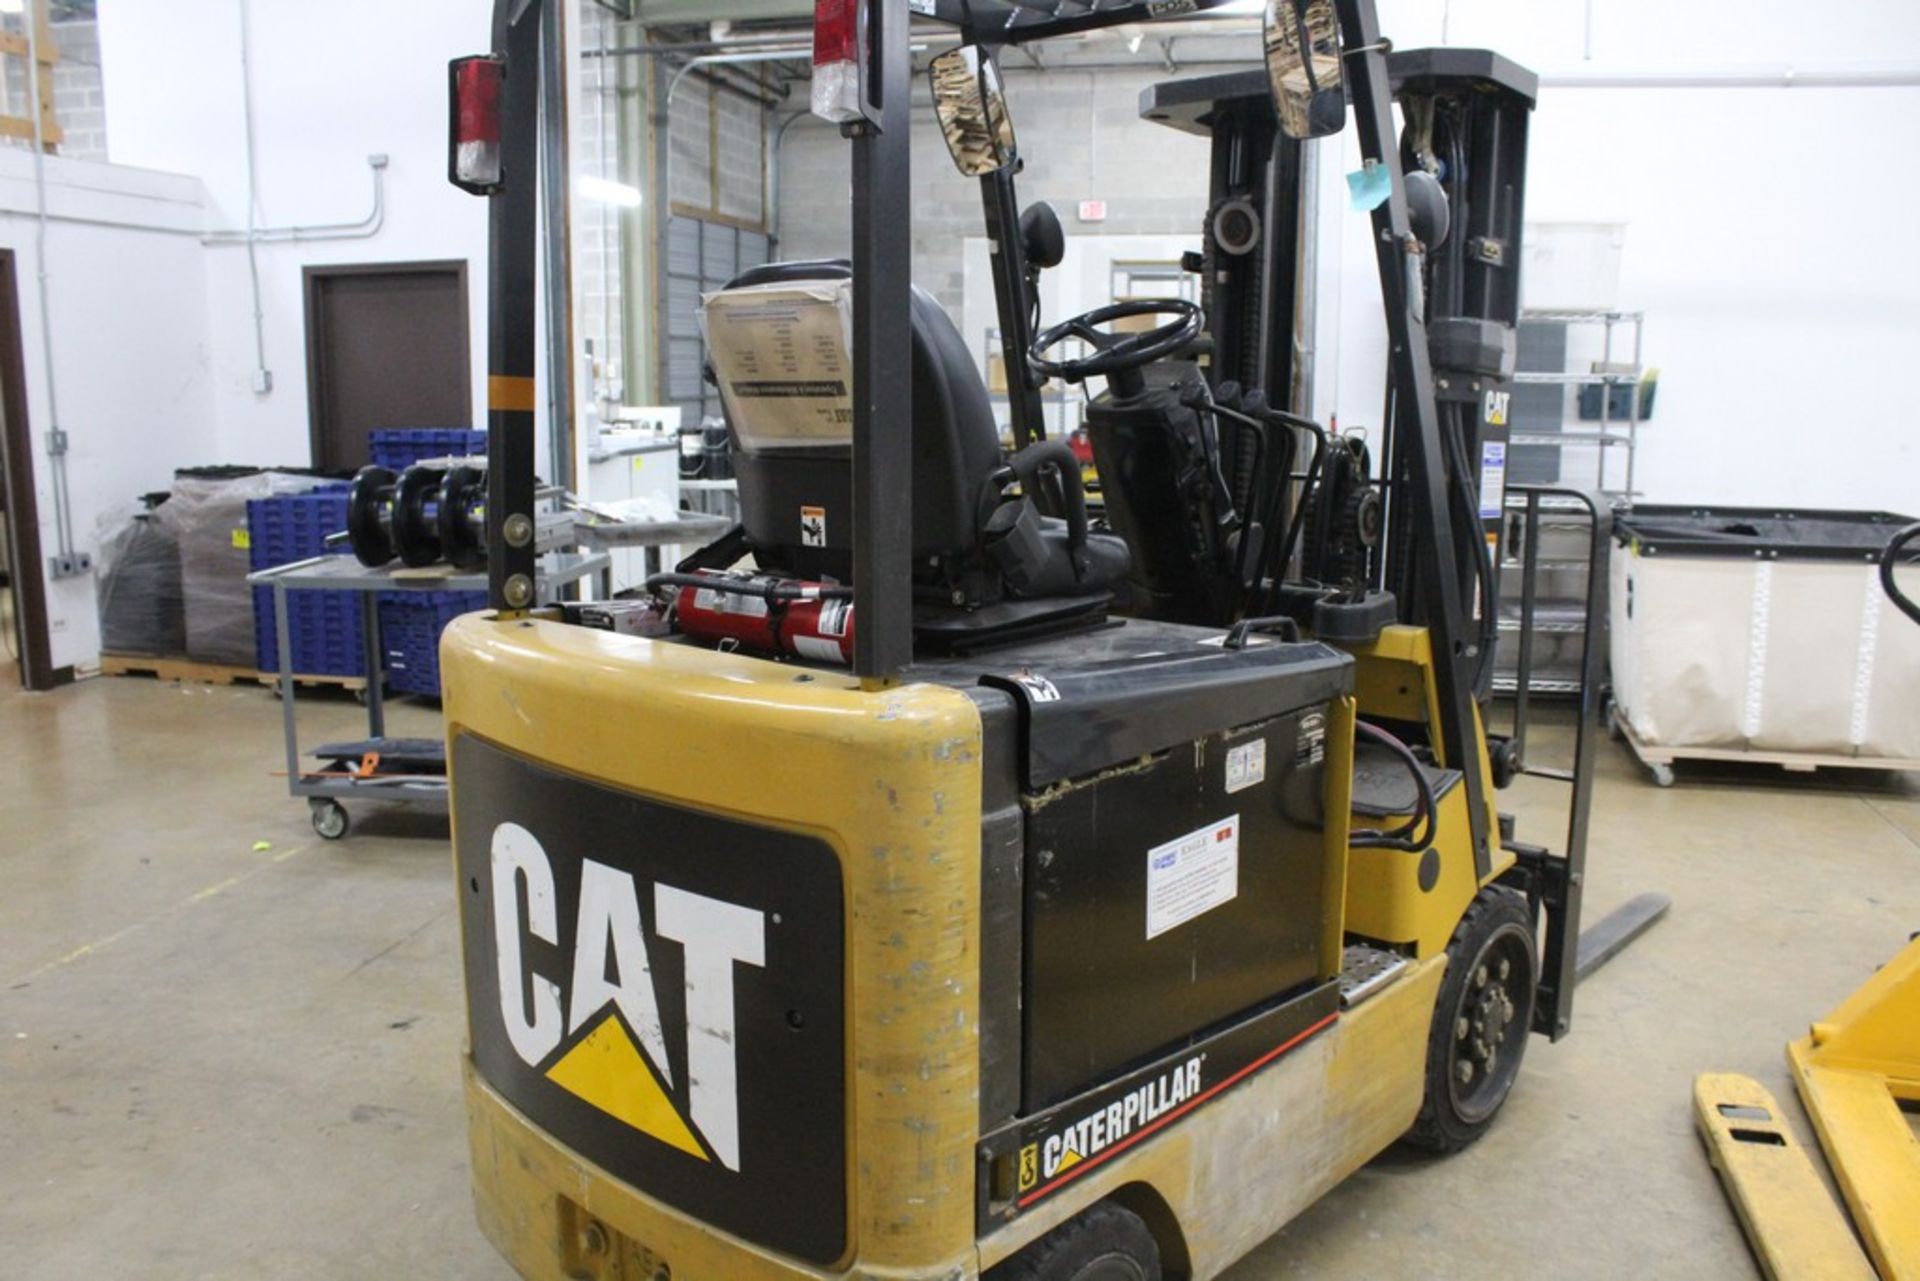 CATERPILLAR MODEL E5000 ELECTRIC FORKLIFT, 3,198 HOURS ON METER, LIFTING CAP. 4,500 LBS., 188" MAX - Image 9 of 12